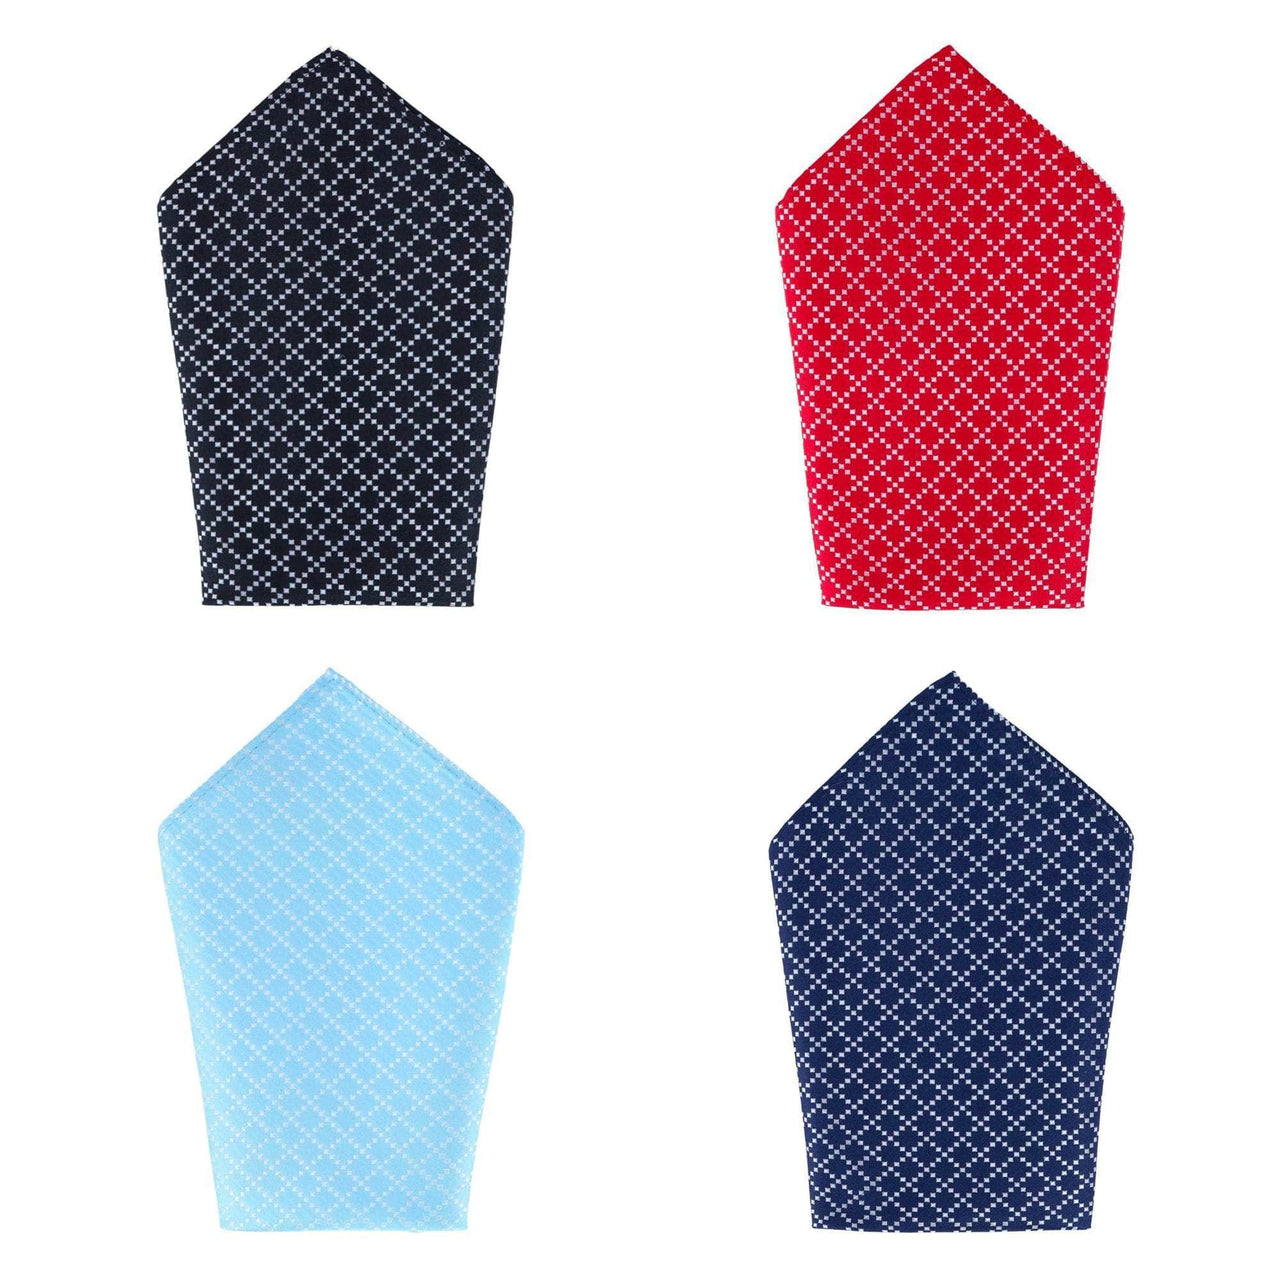 Black, Light Blue, Navy, and Red